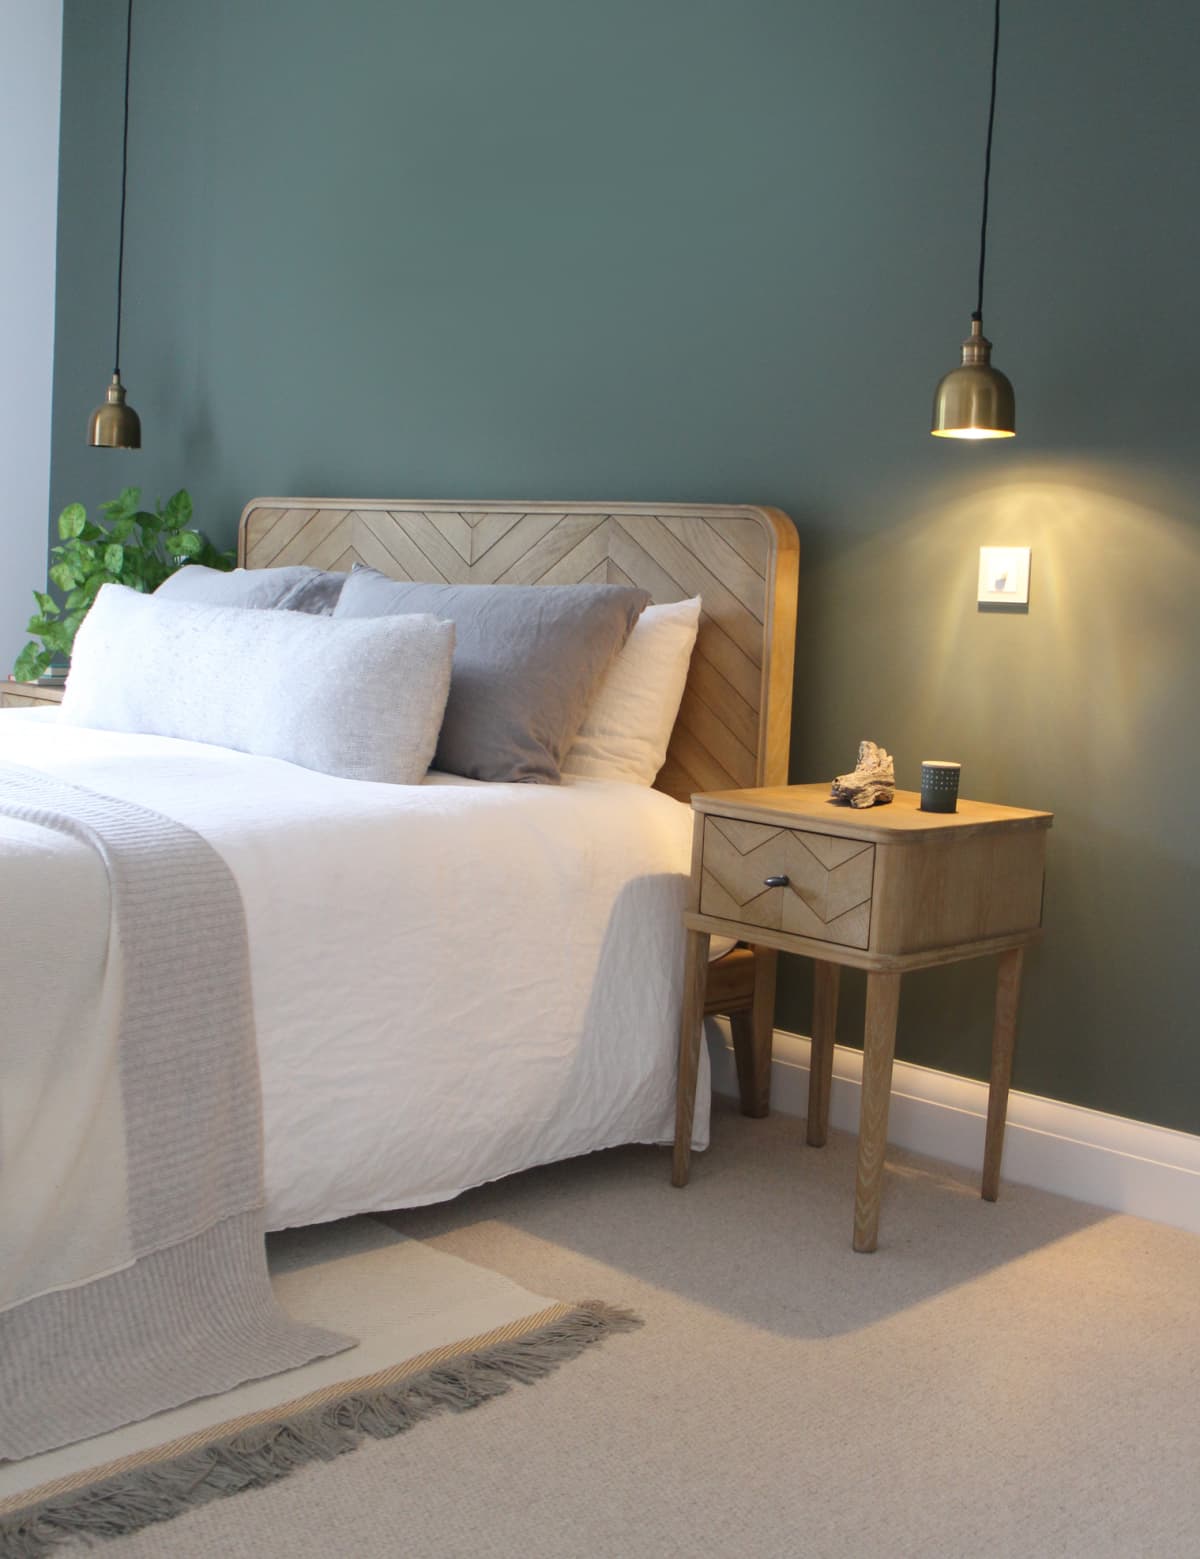 A bed with bedside table and lamp